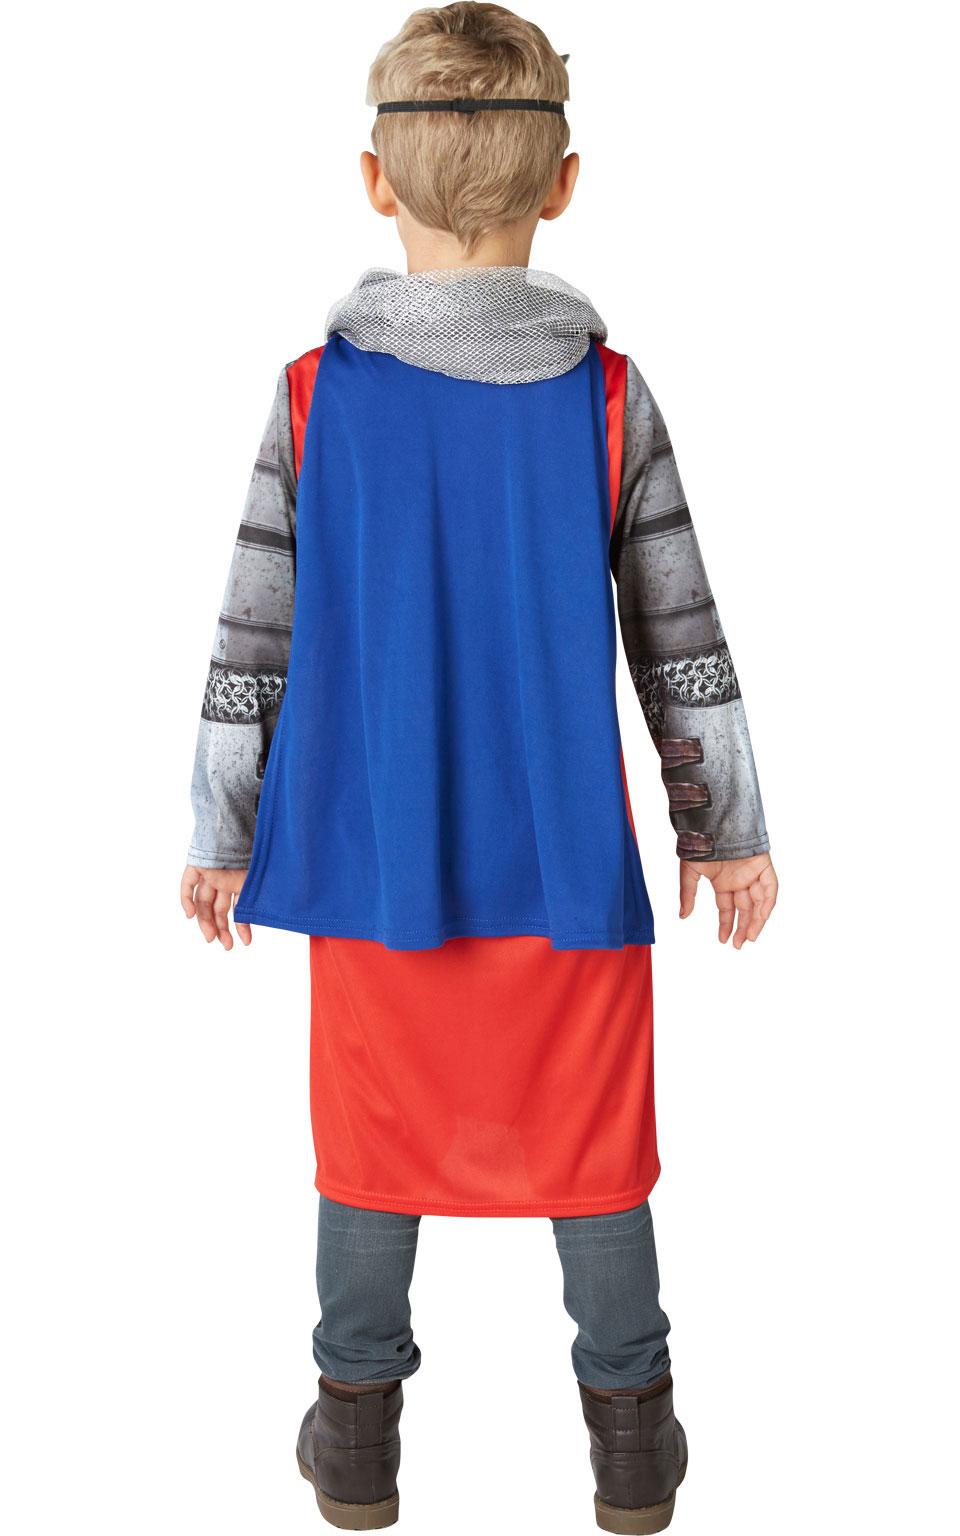 Kid's King Arthur Fancy Dress by Rubies 630701 available here at Karnival Costumes online party shop